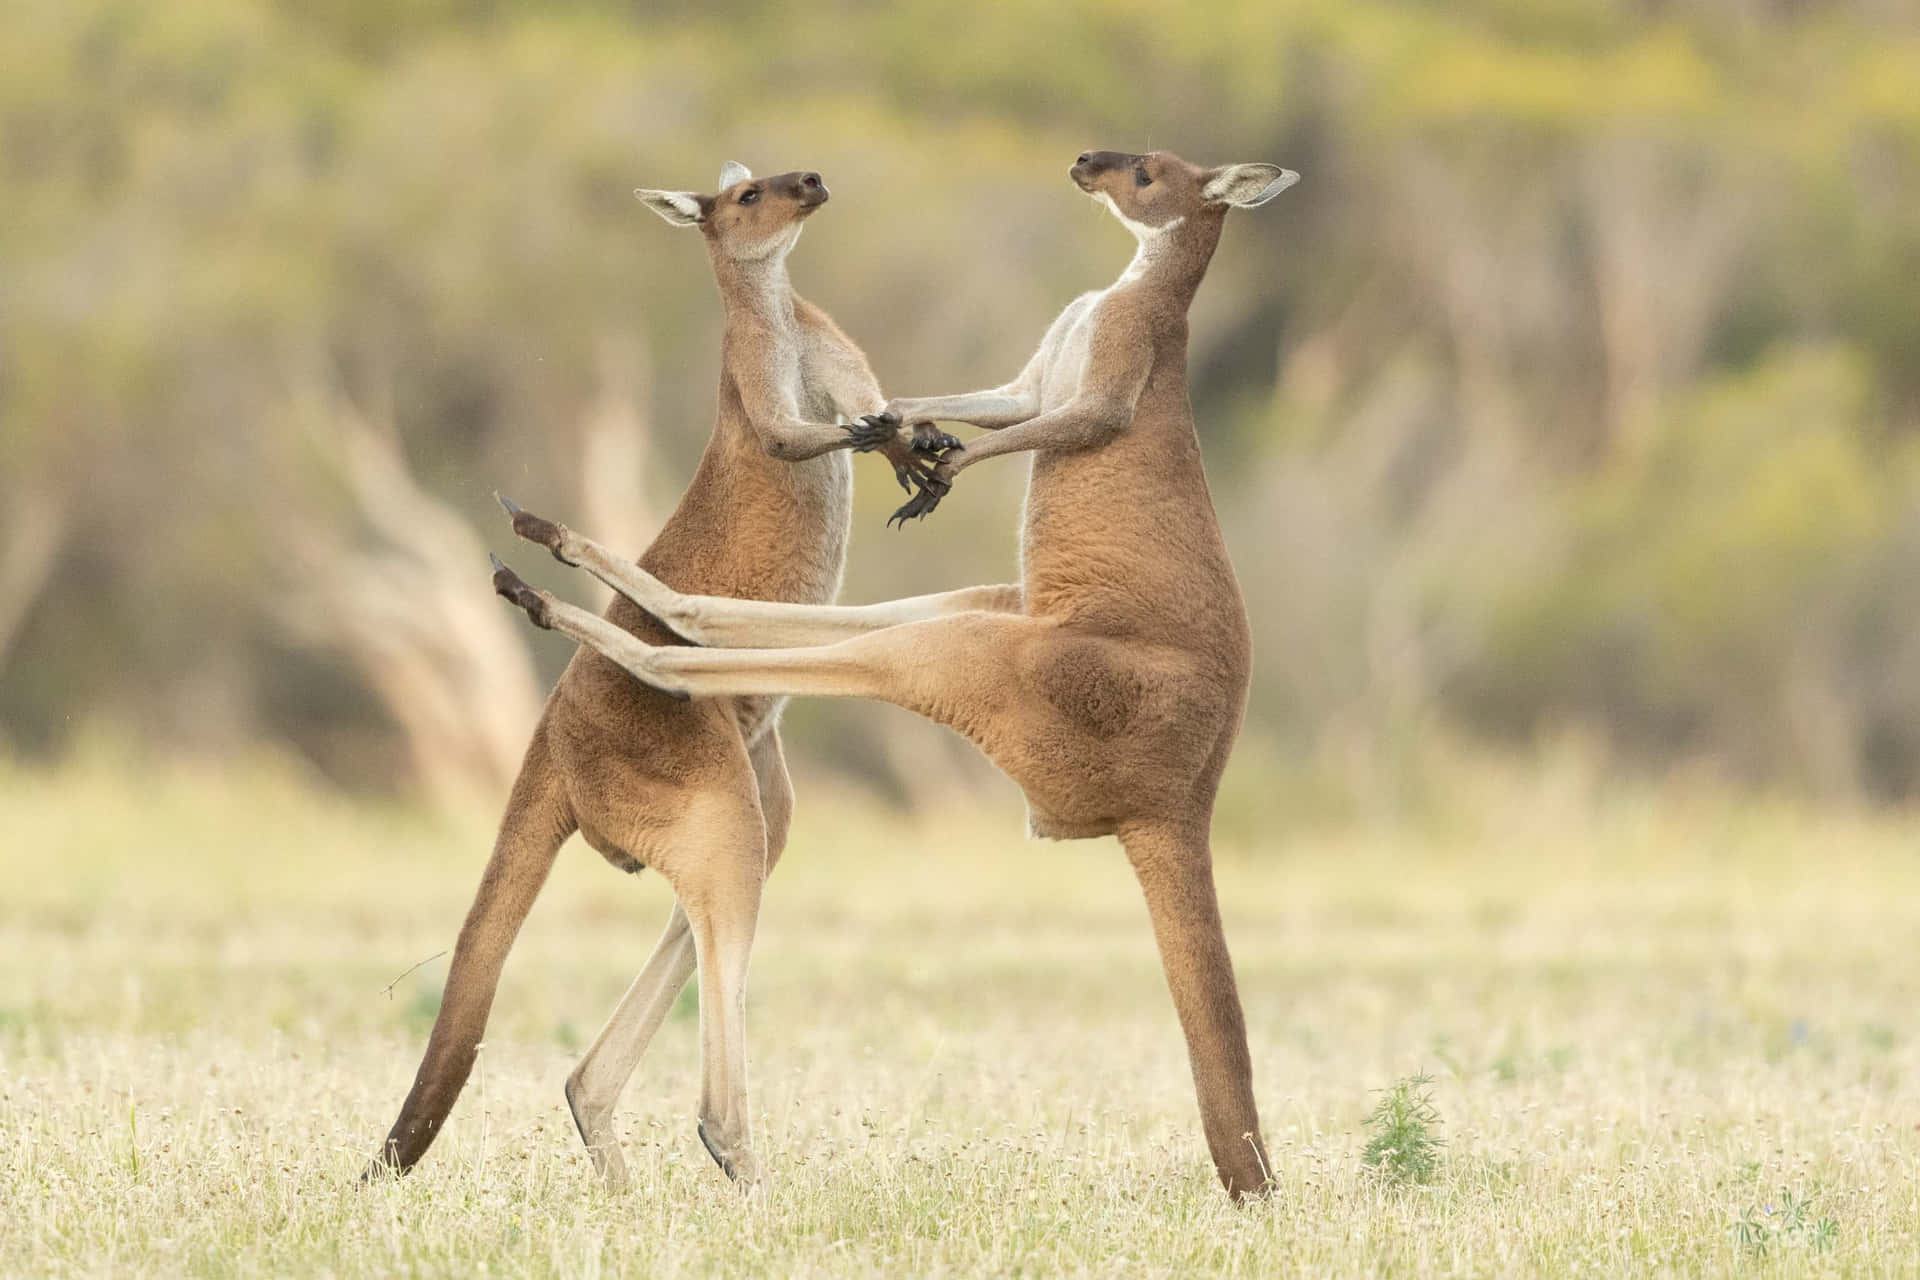 Two Kangaroos Are Fighting In The Grass